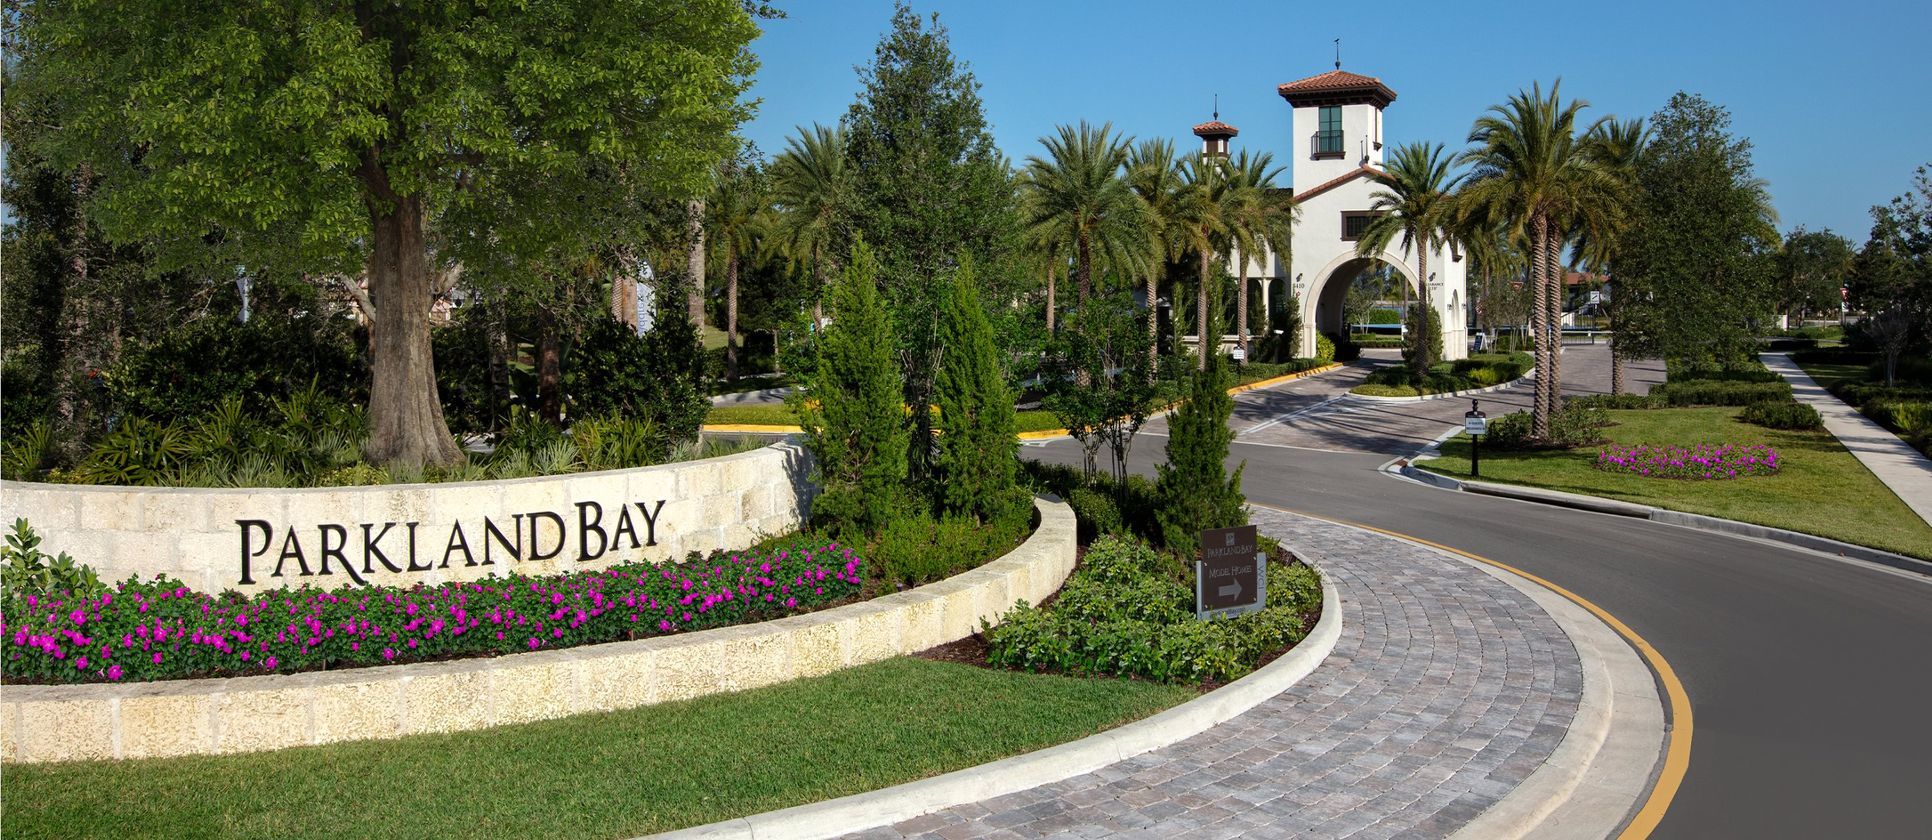 parkland bay sign and roundabout